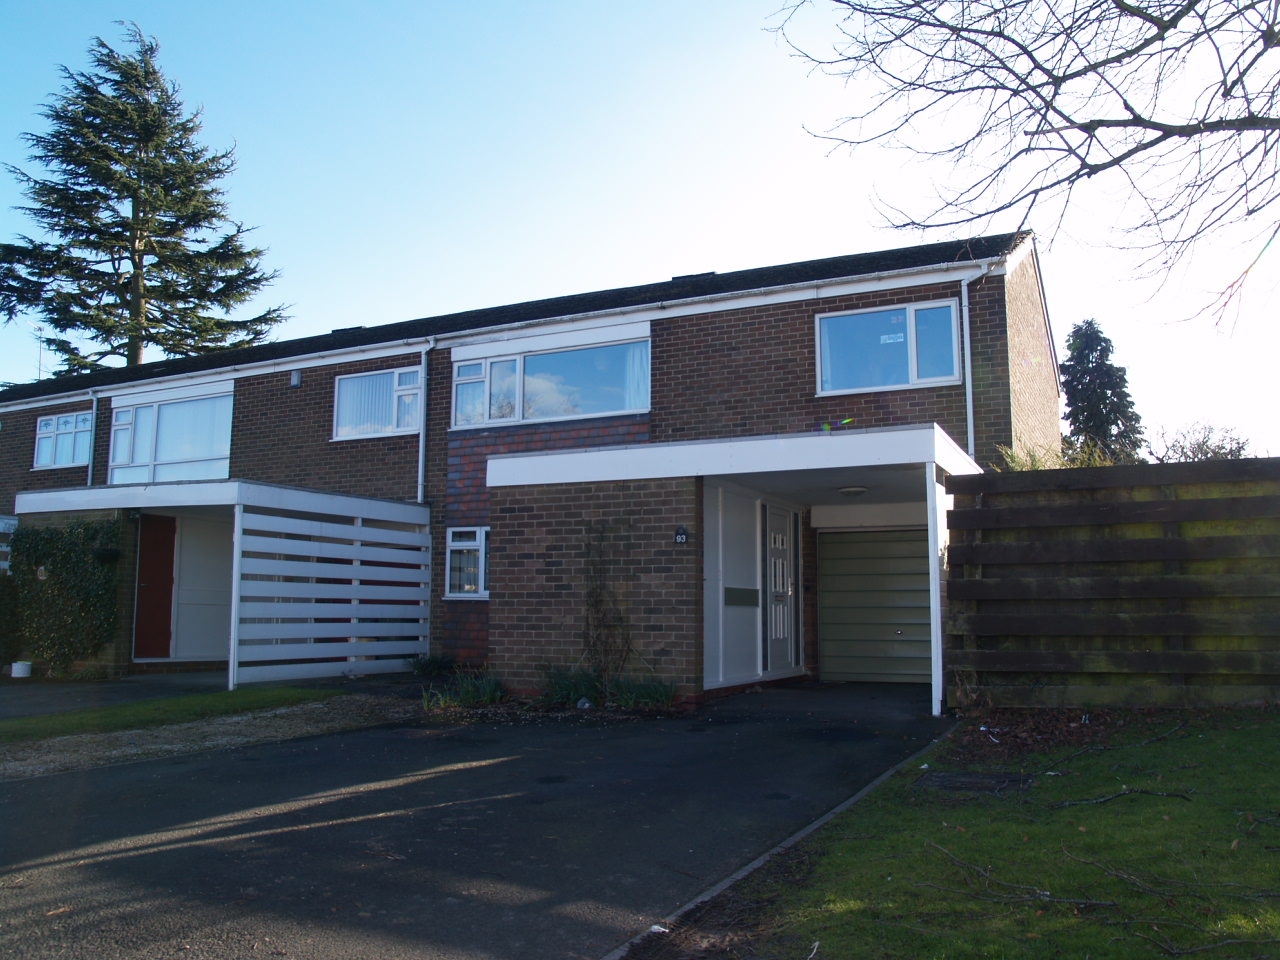 4 bedroom end terraced house SSTC in Solihull - Main Image.